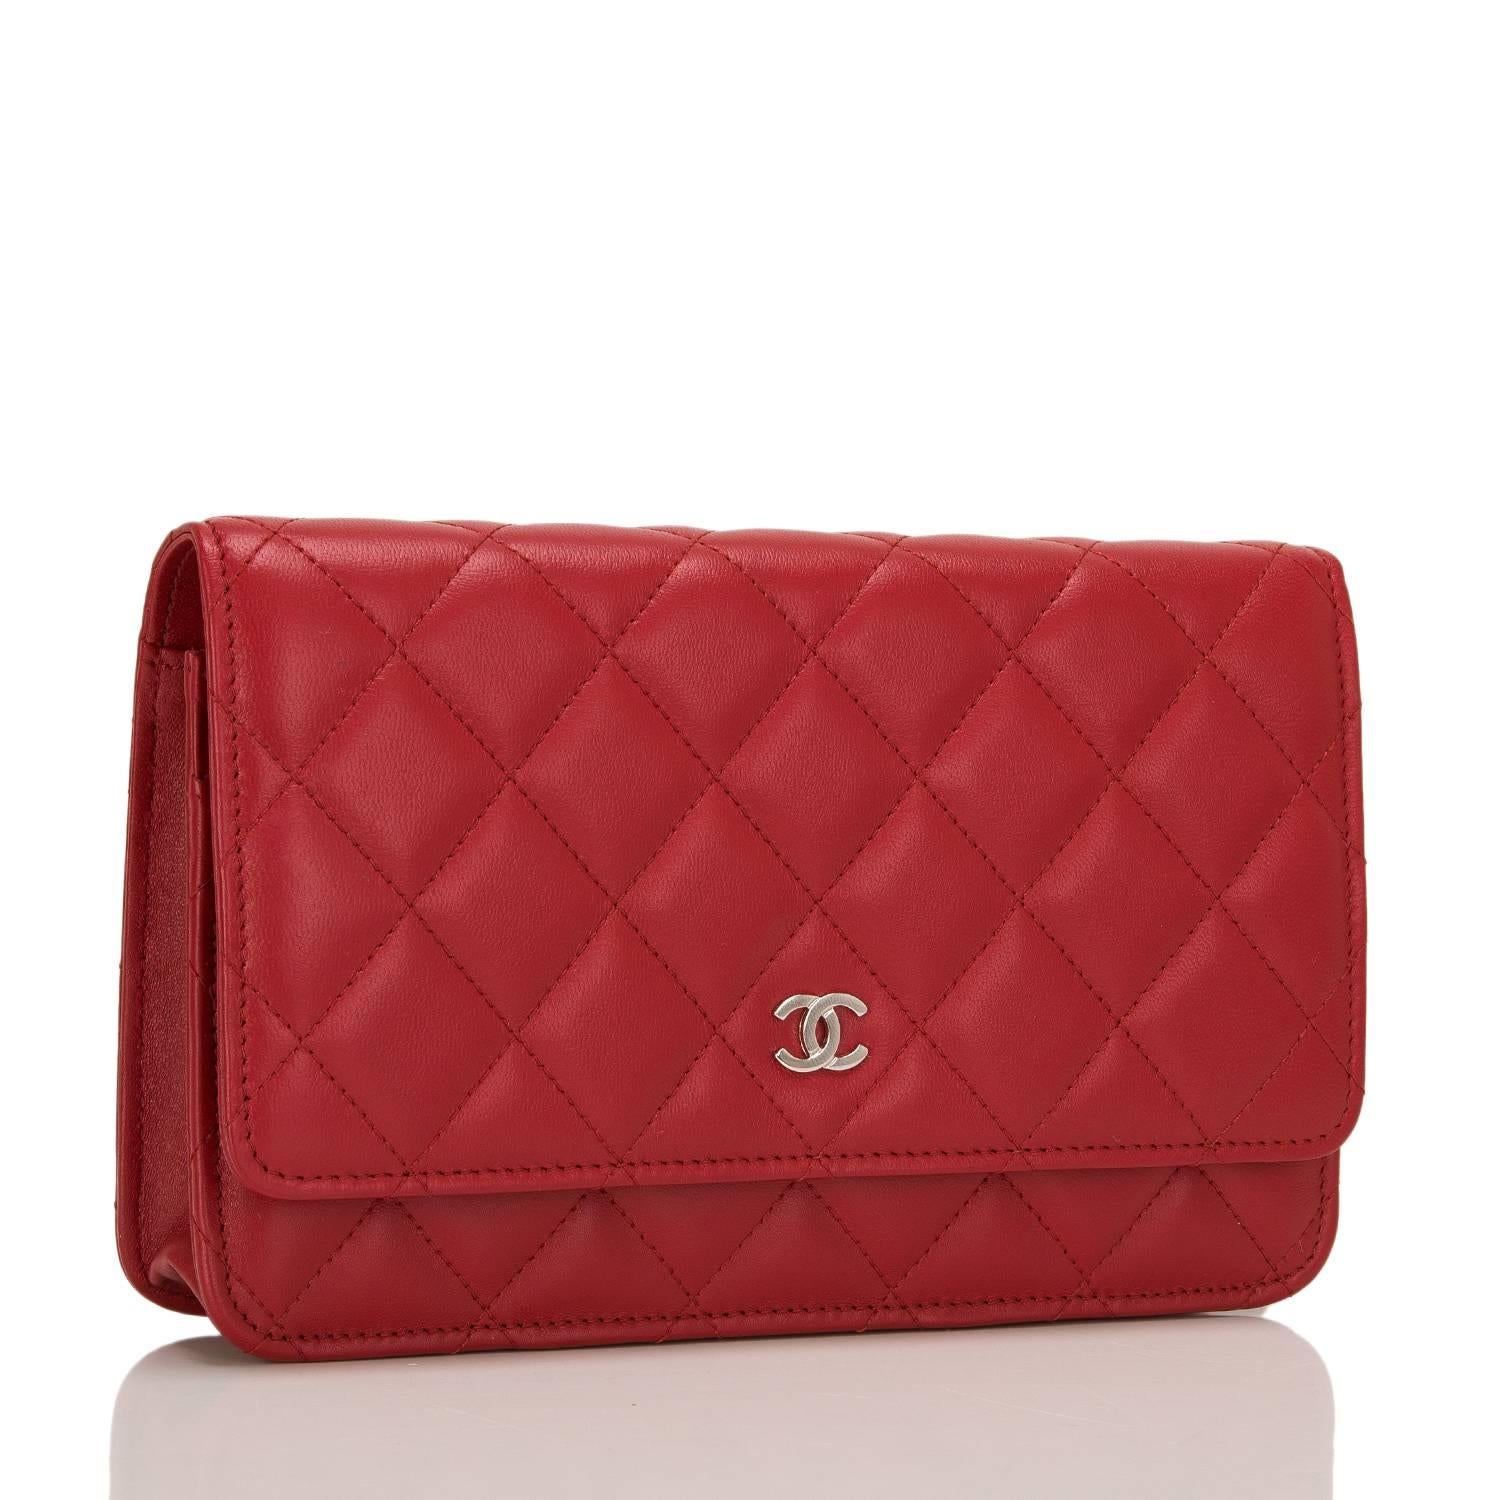 This timeless Wallet on Chain (WOC) in red lambskin leather with silver tone hardware features signature Chanel quilting, front flap with CC charm and hidden snap closure, expandable sides and bottom, half moon rear pocket and interwoven silver tone